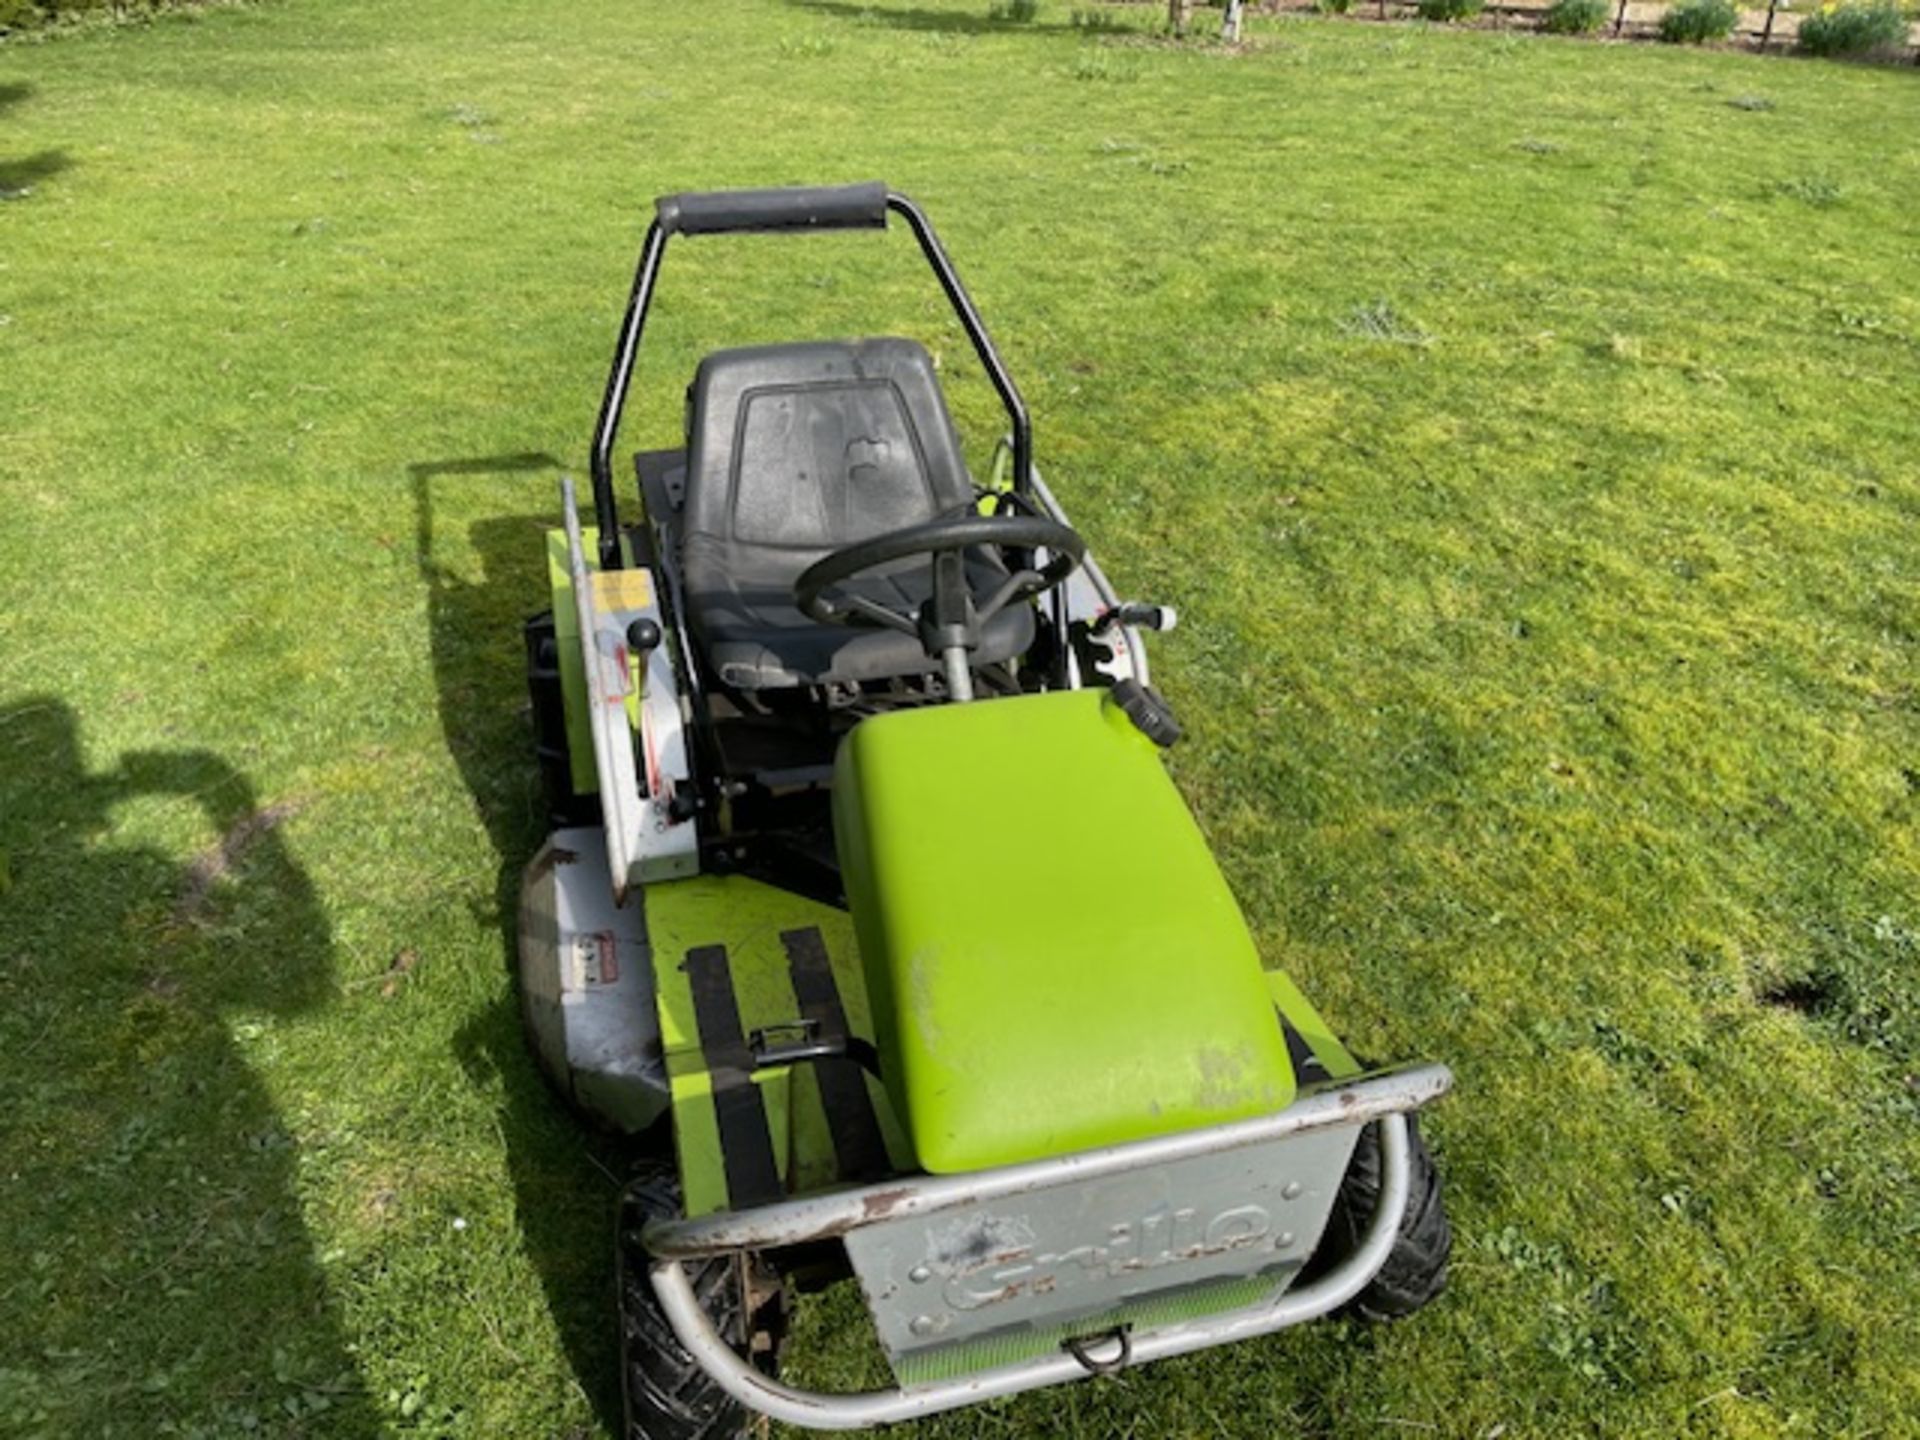 2007, GRILLO CLIMBER 9.21 SERIES RIDE ON MOWER - Image 9 of 10